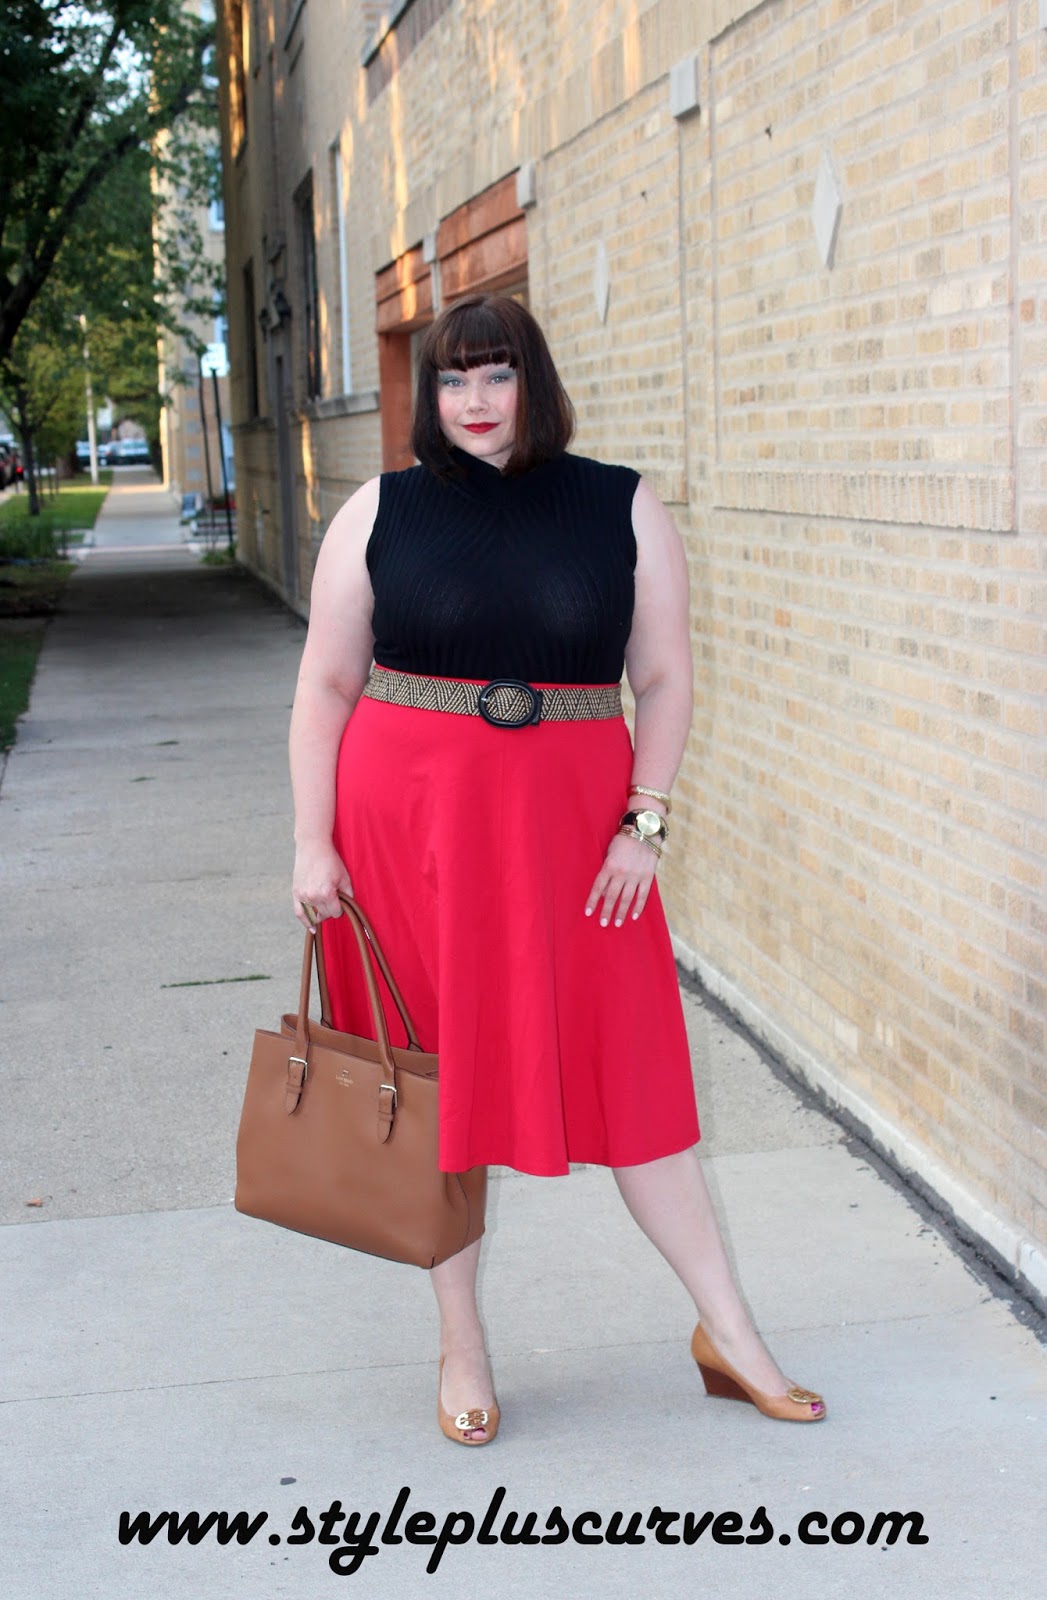 Plus is Equal: Celebrating the Plus Size Revolution in Red and Black